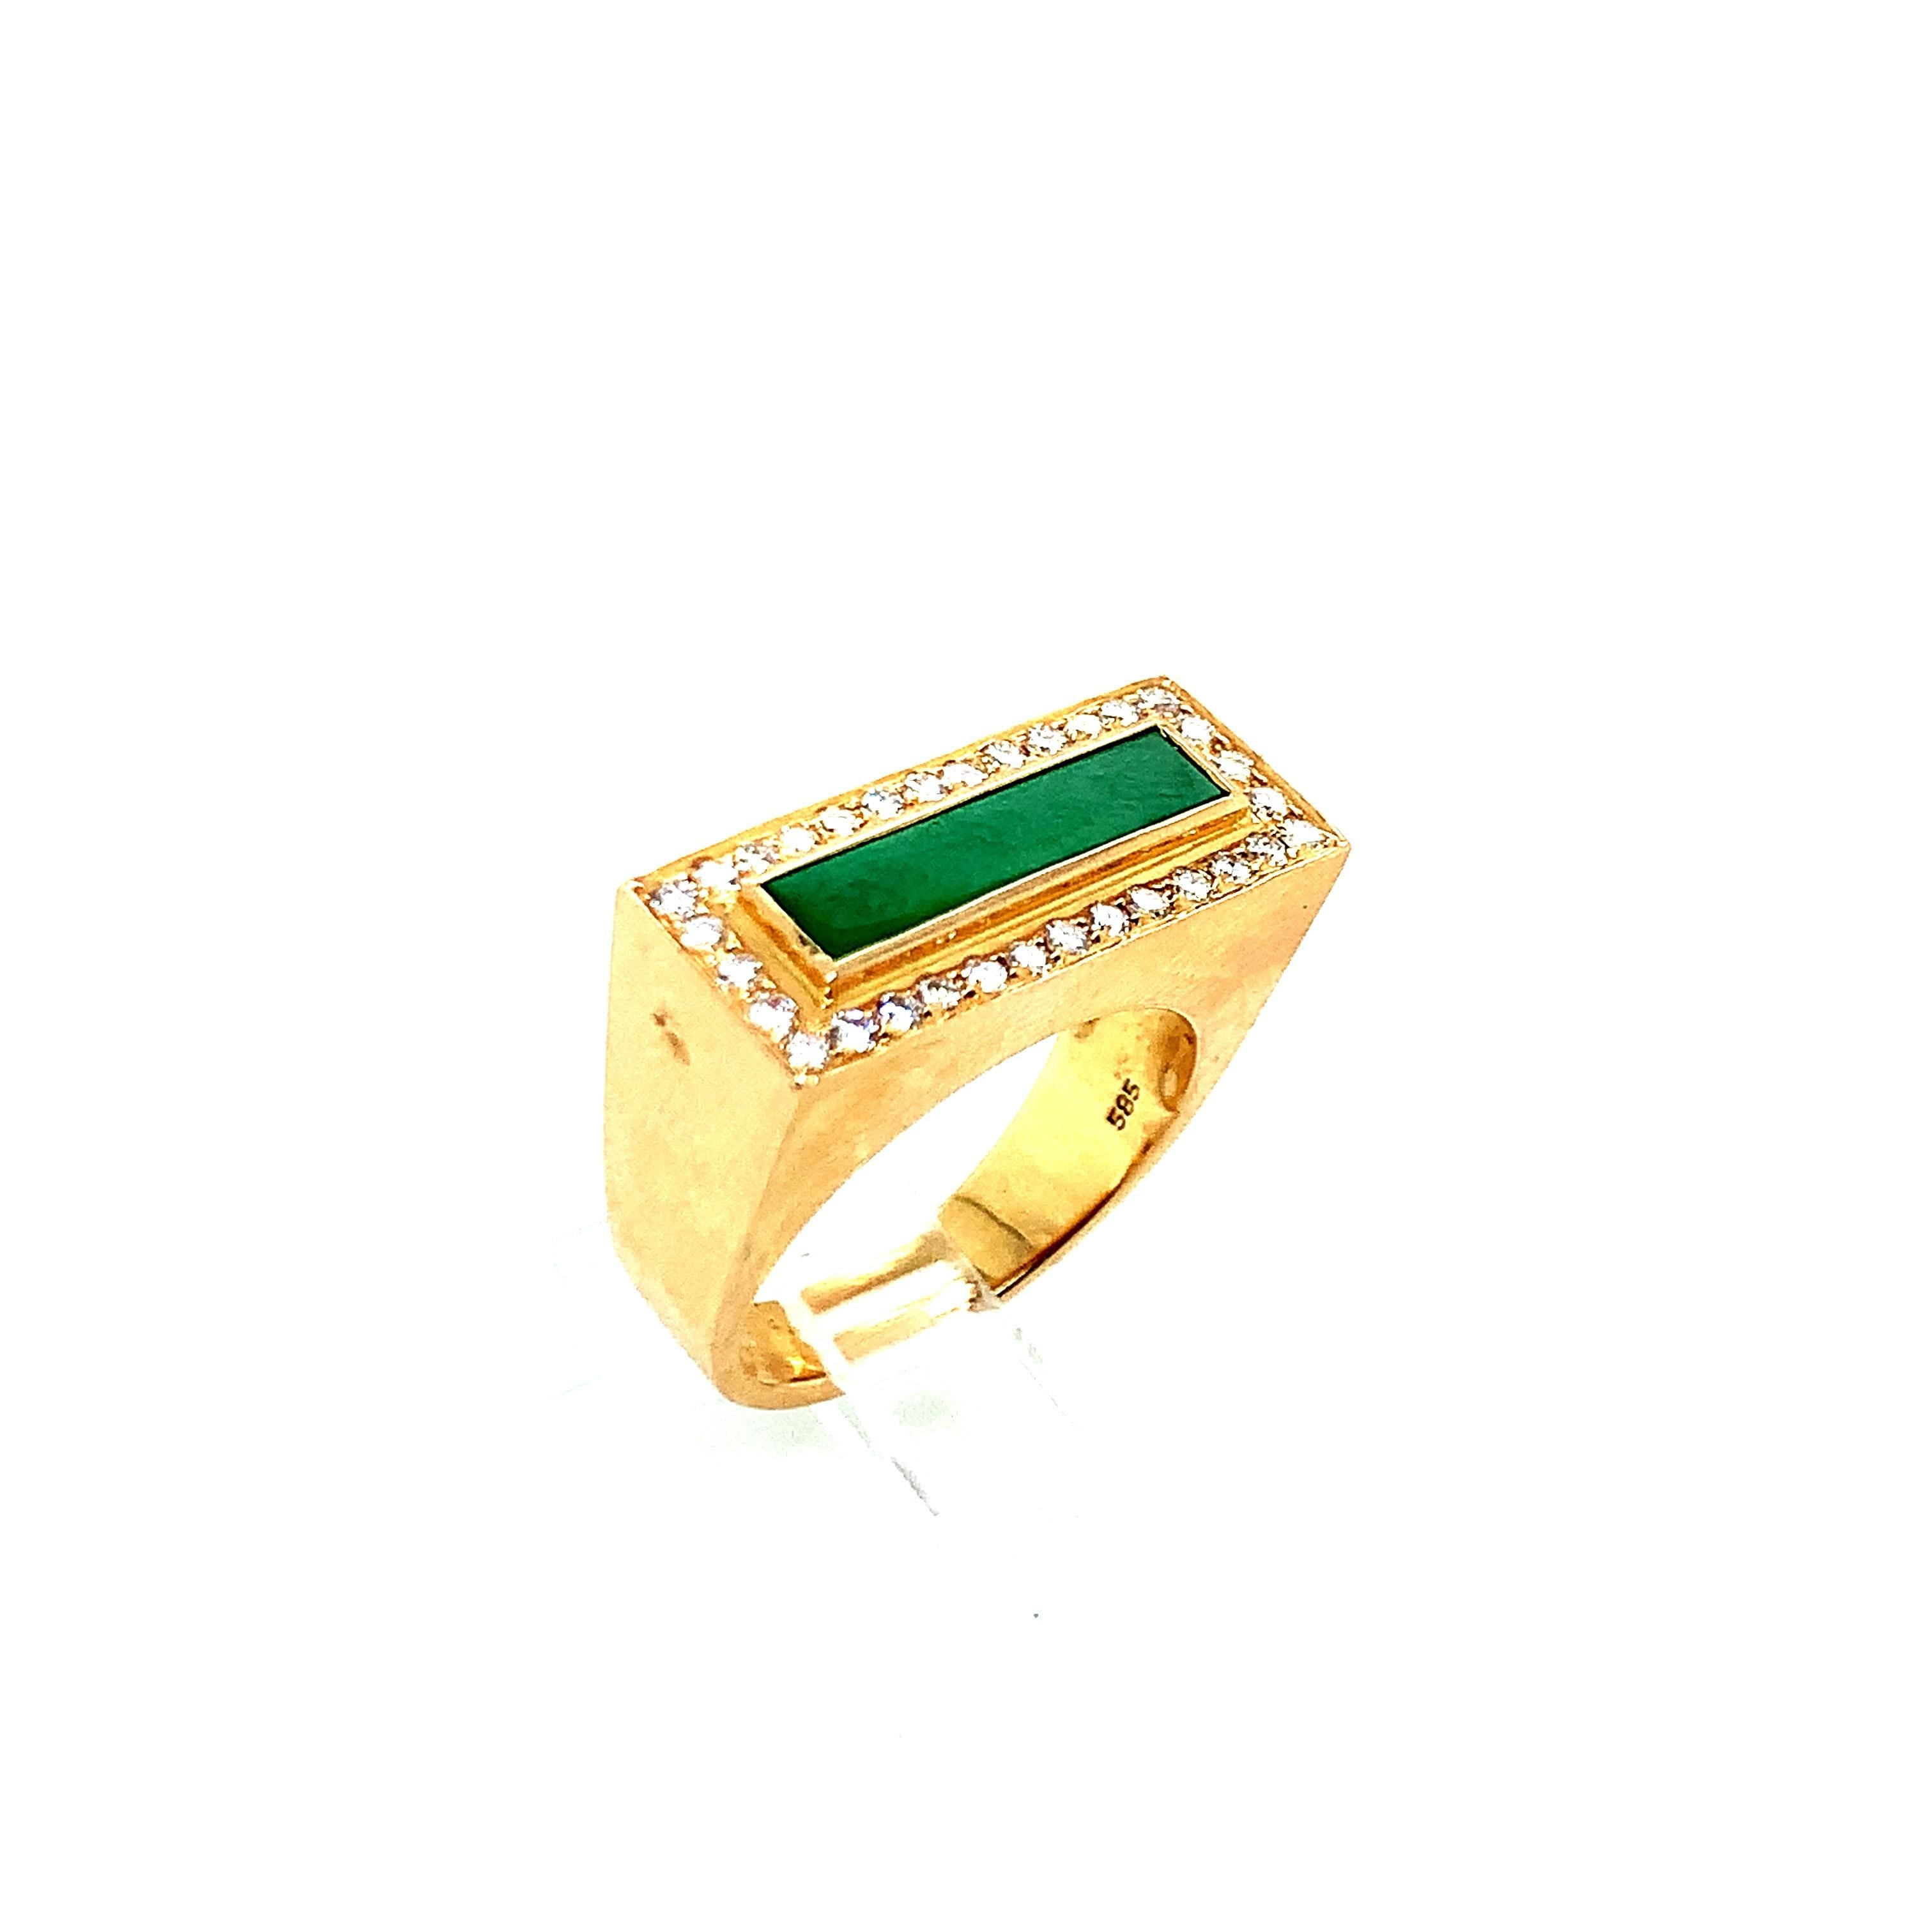 A 14 karat gold ring with a natural type A jade at its center. Total weight: 10.3 grams. Size 6.5.